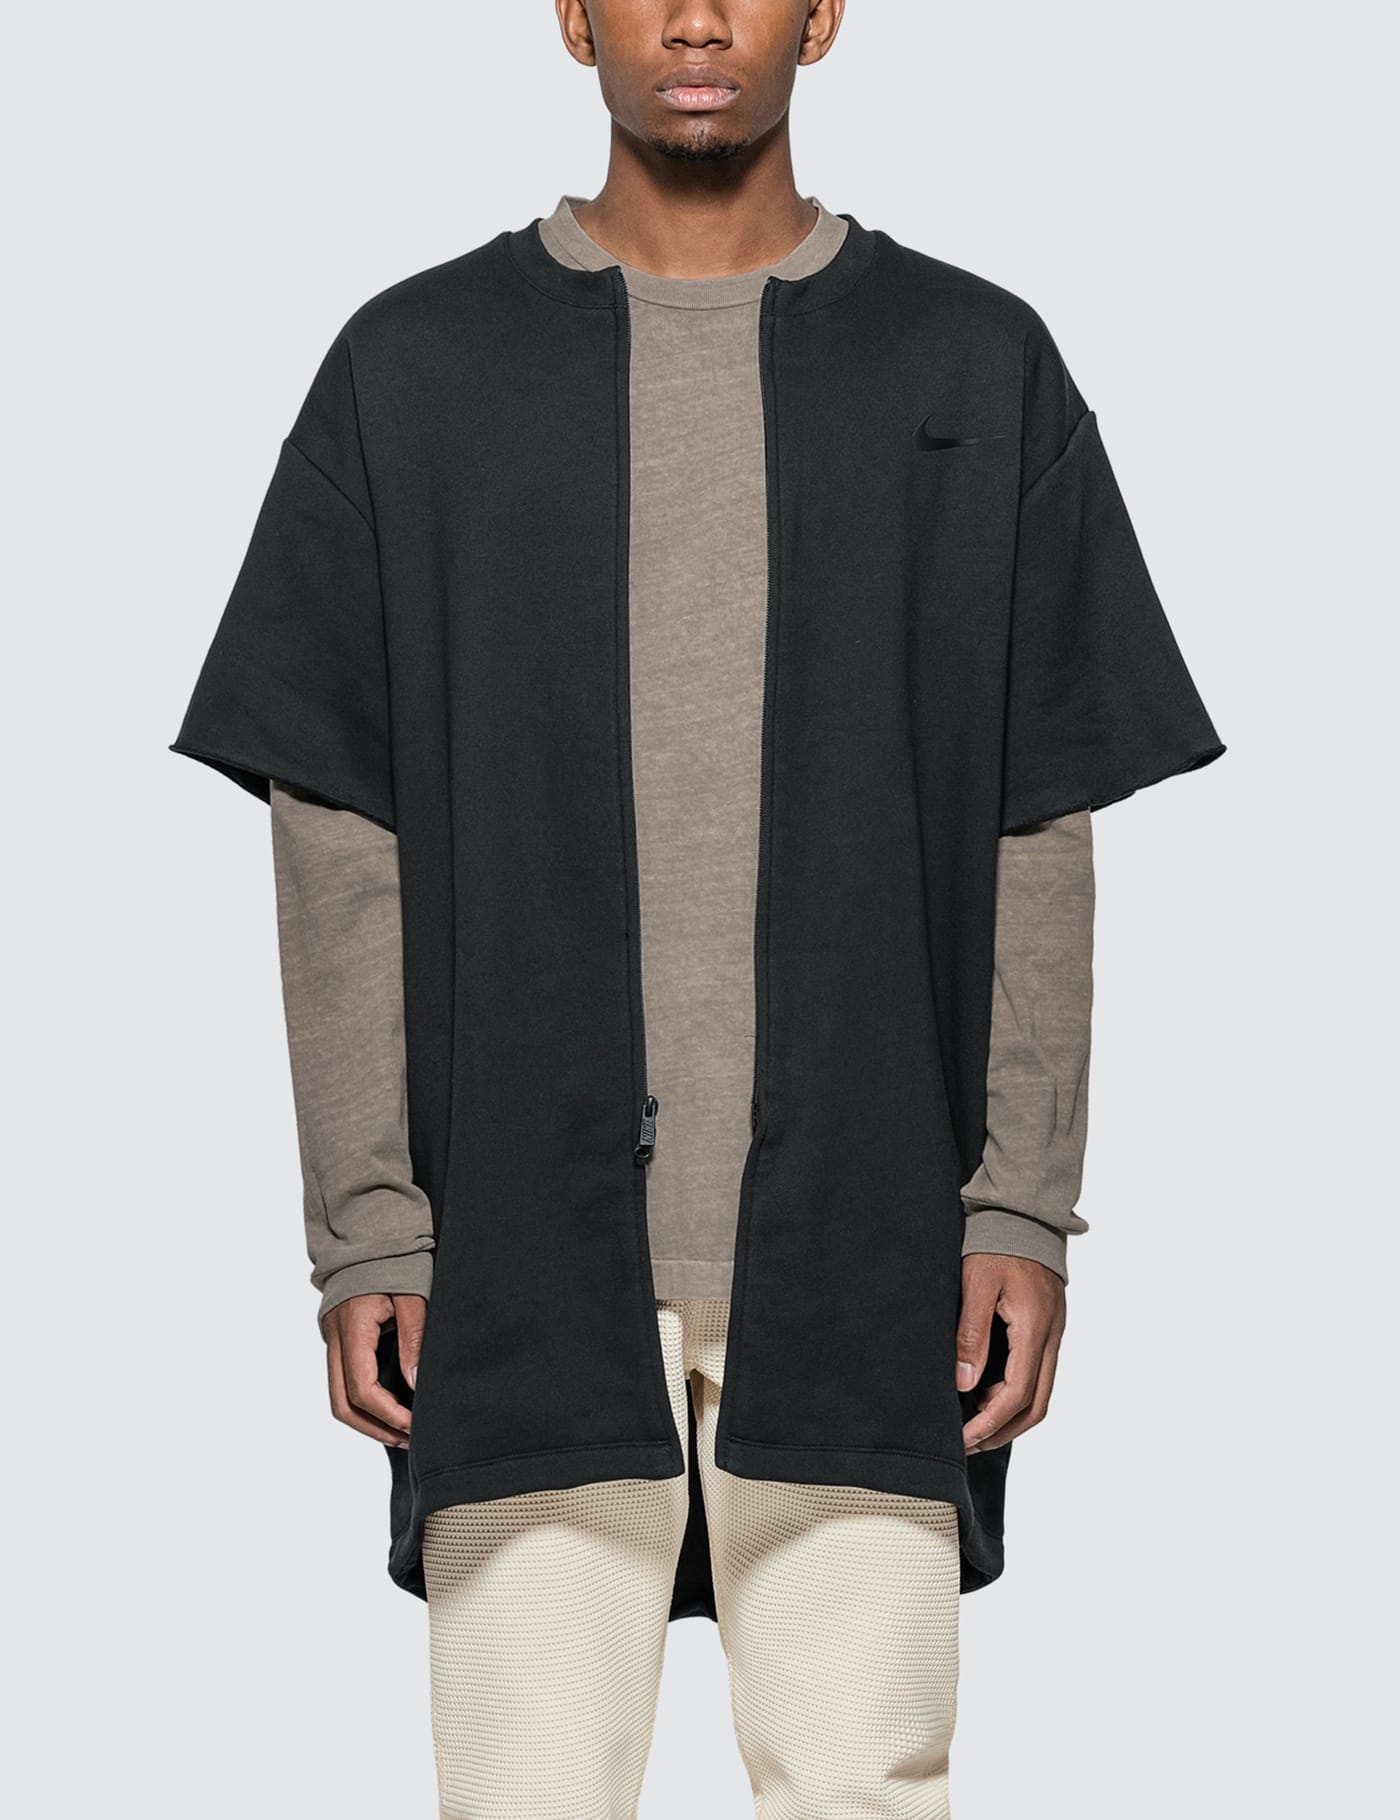 nike x fear of god warm up top